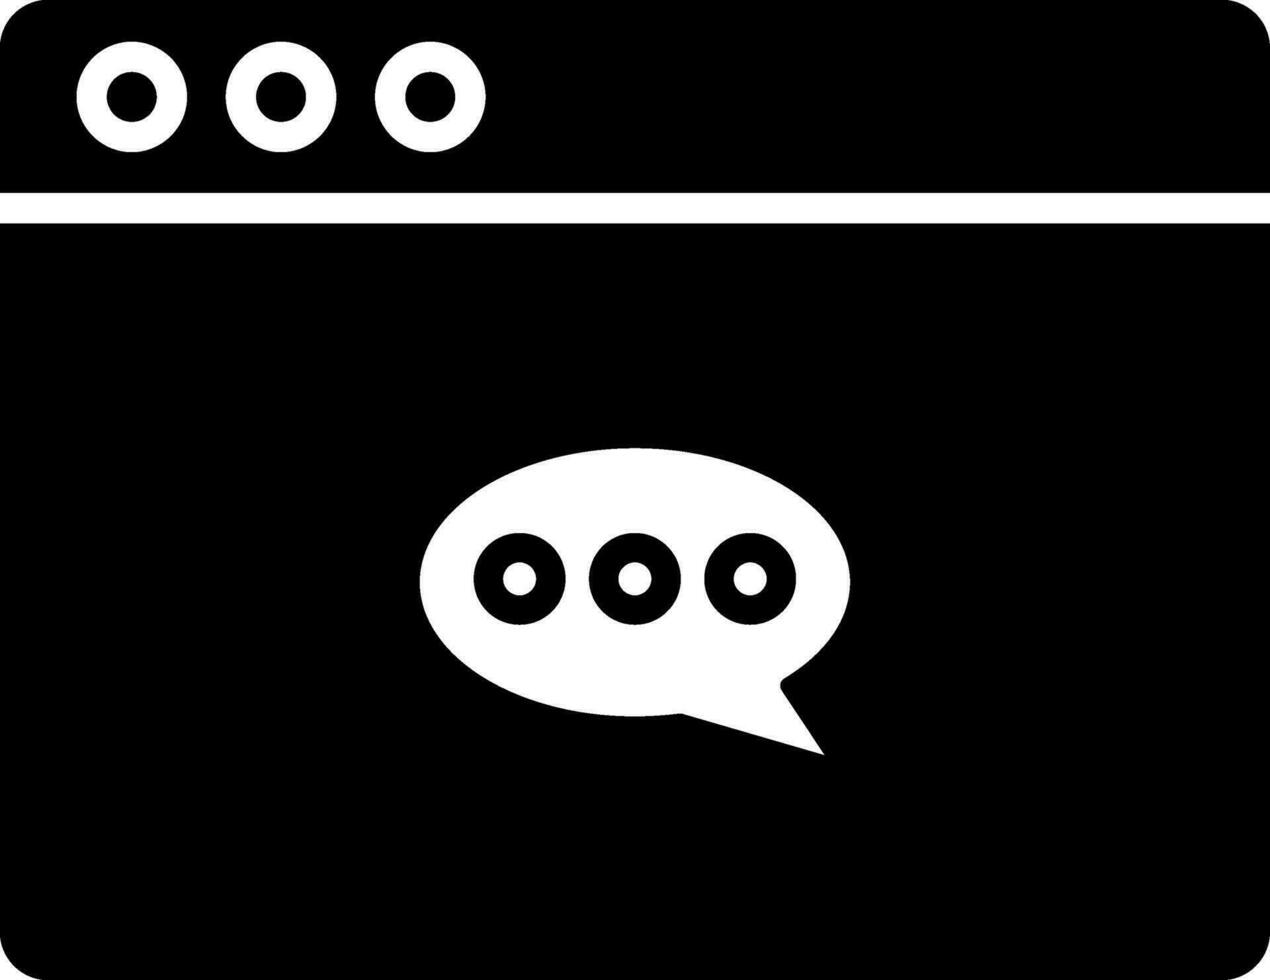 Online message or chatting web page icon in Black and White color. vector